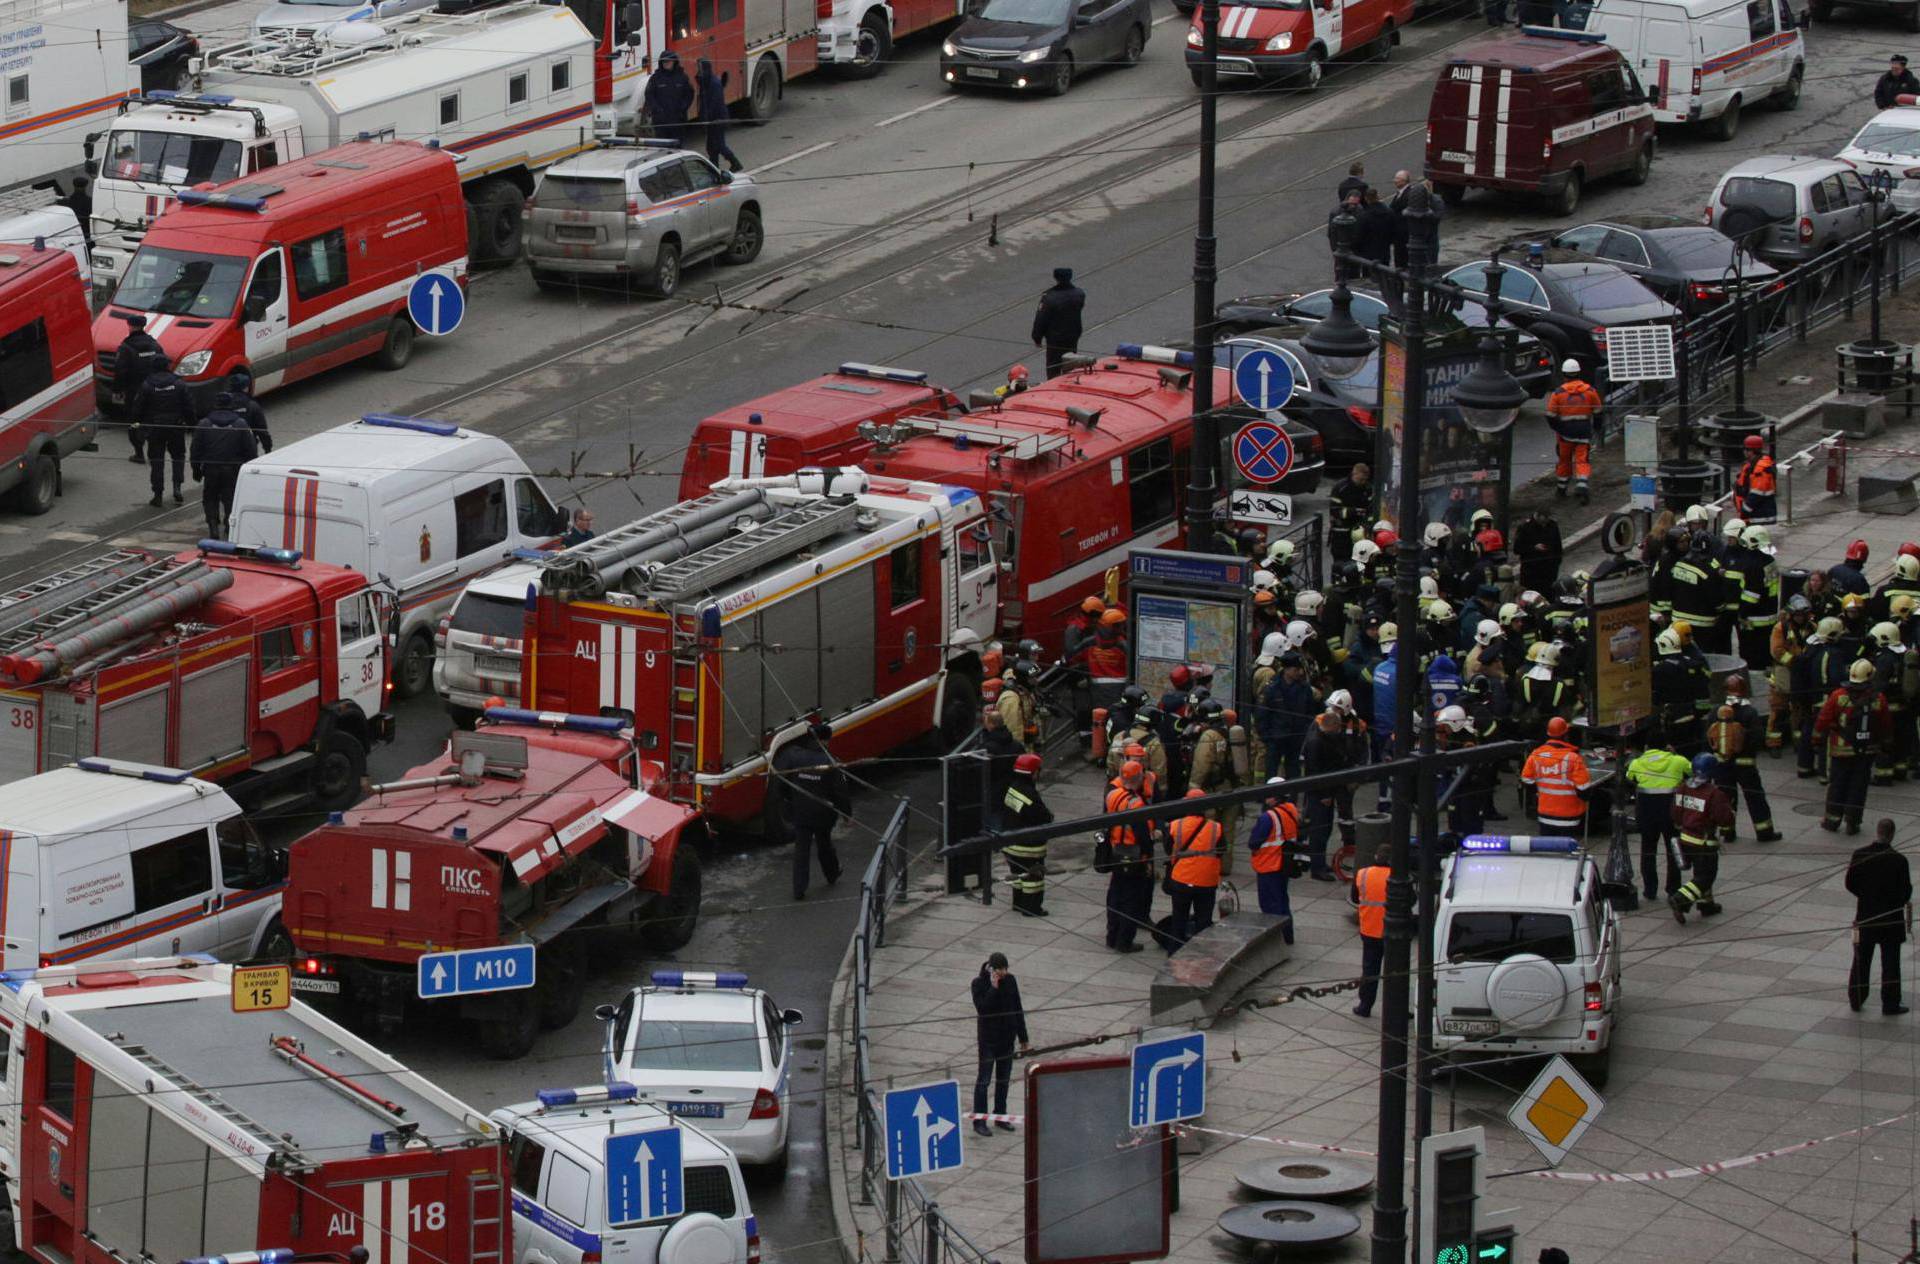 General view of emergency services attending the scene outside Sennaya Ploshchad metro station, following explosions in two train carriages in St. Petersburg